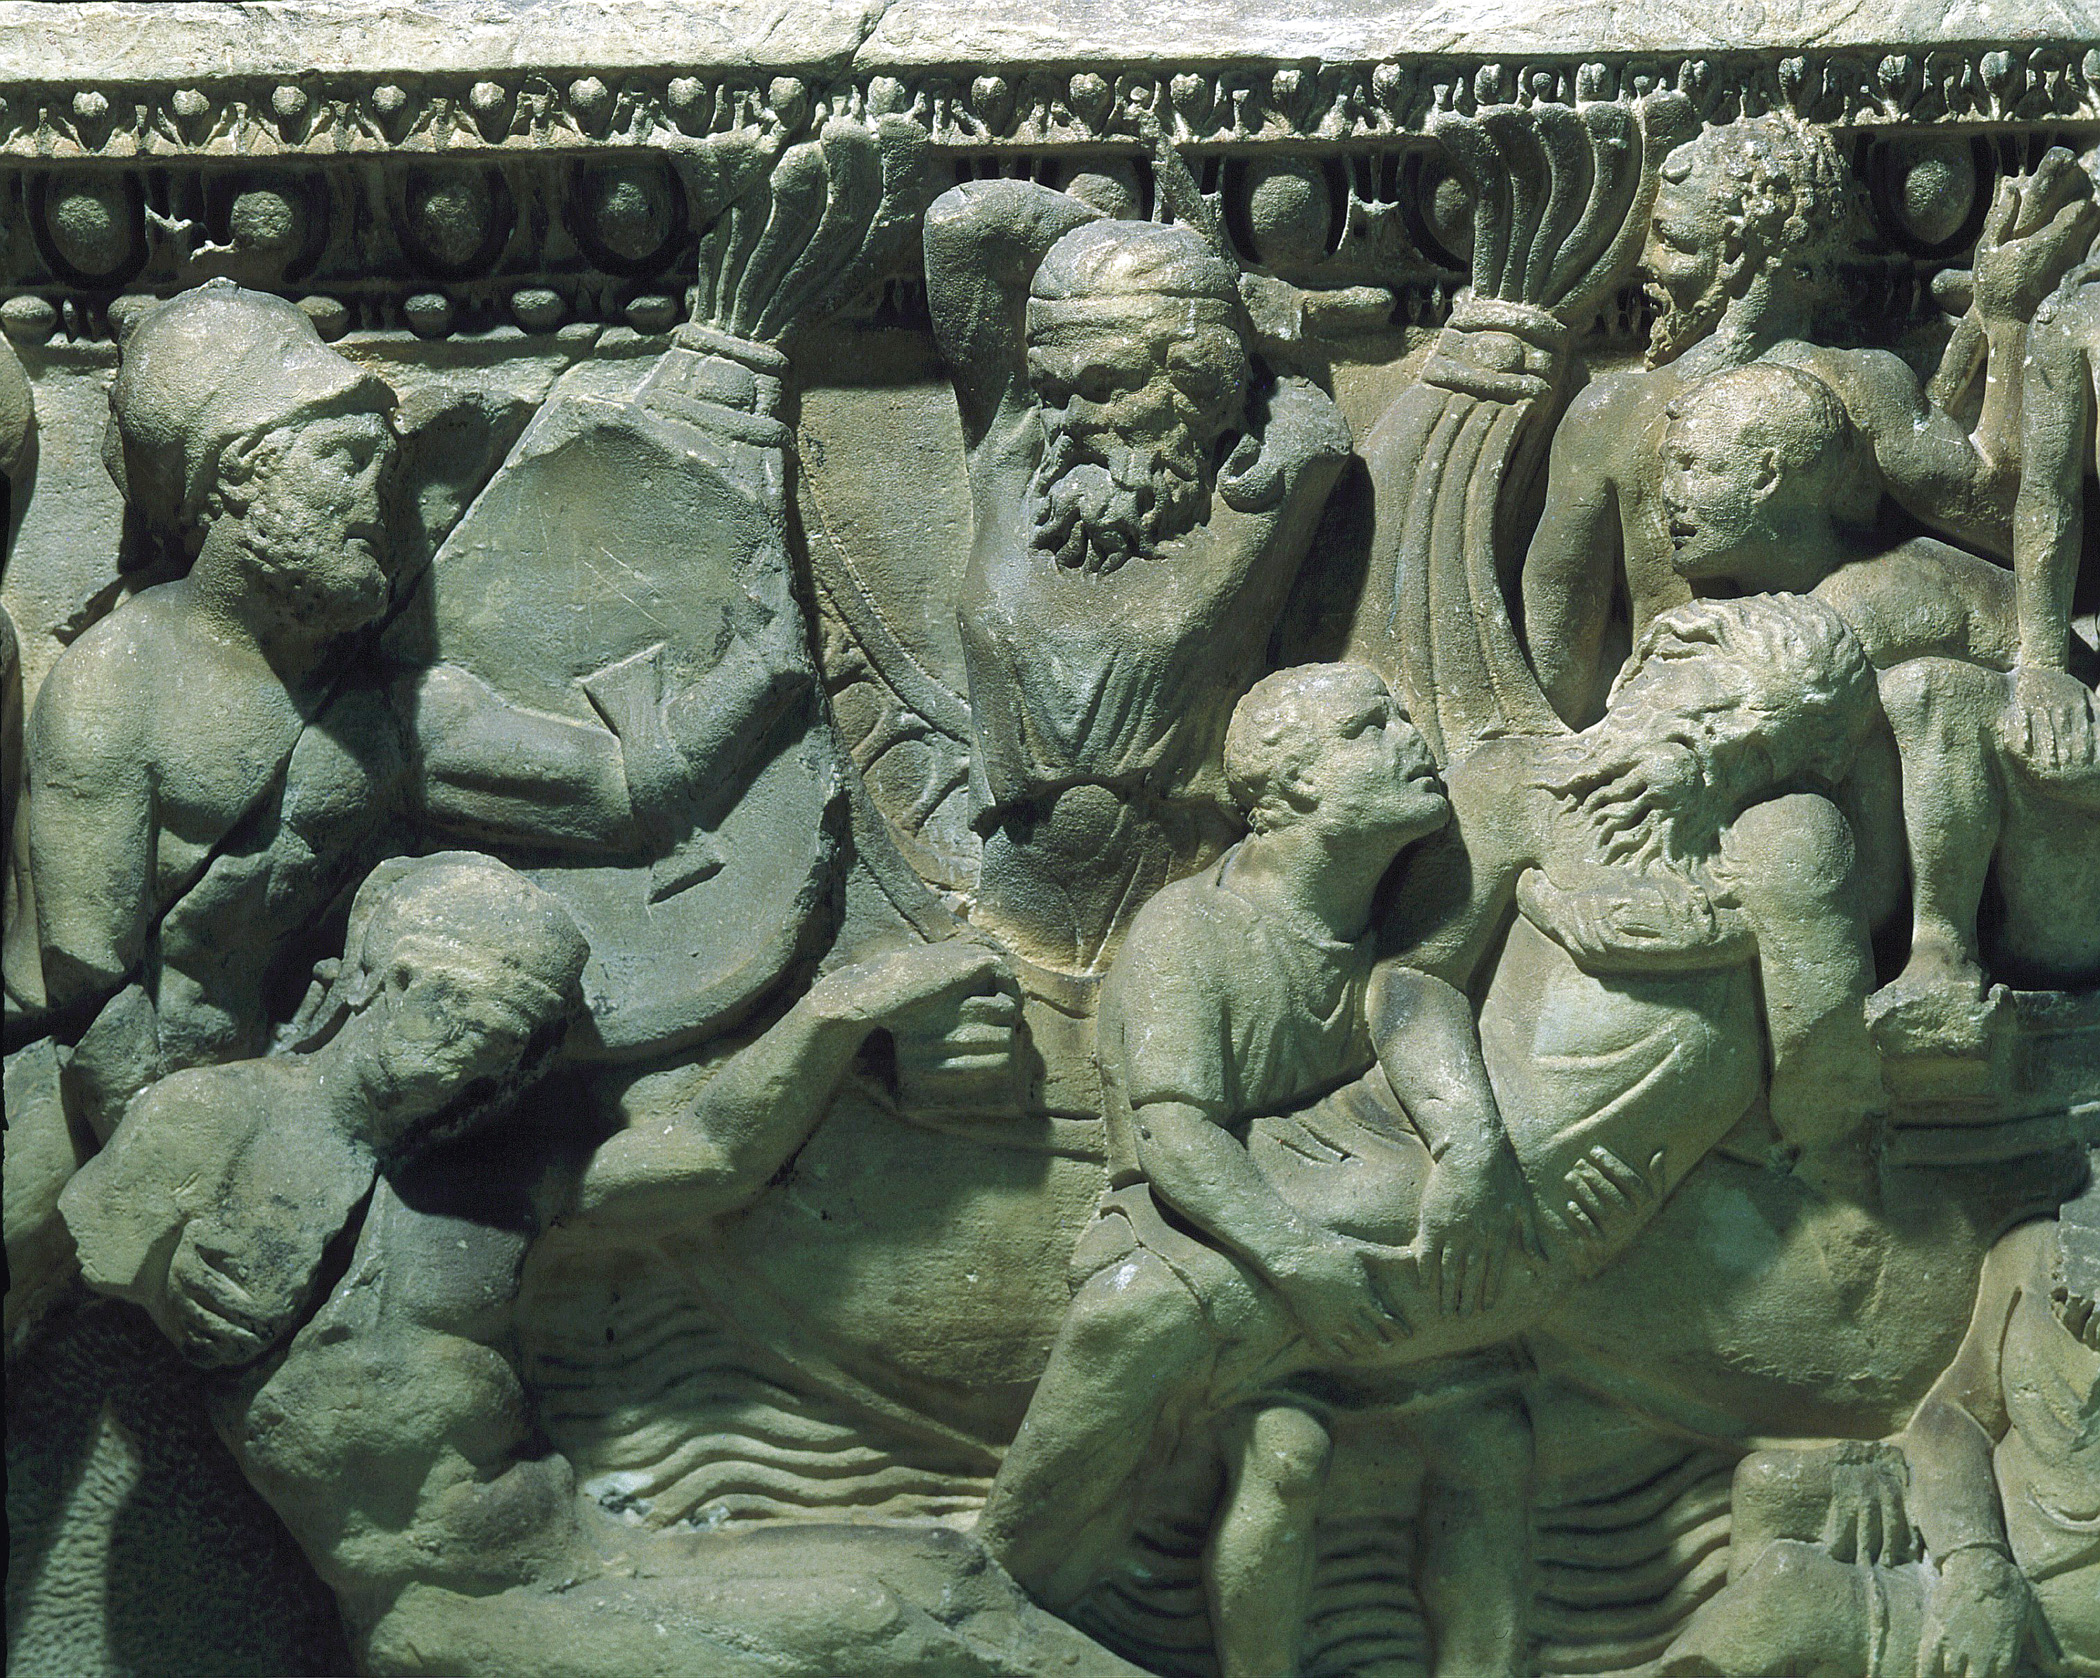 Soldiers and sailors clash in a naval battle depicted on a 2nd century bc sarcophagus. As Rome looked beyond the Italian peninsula, it could see that control of the sea was vital. 